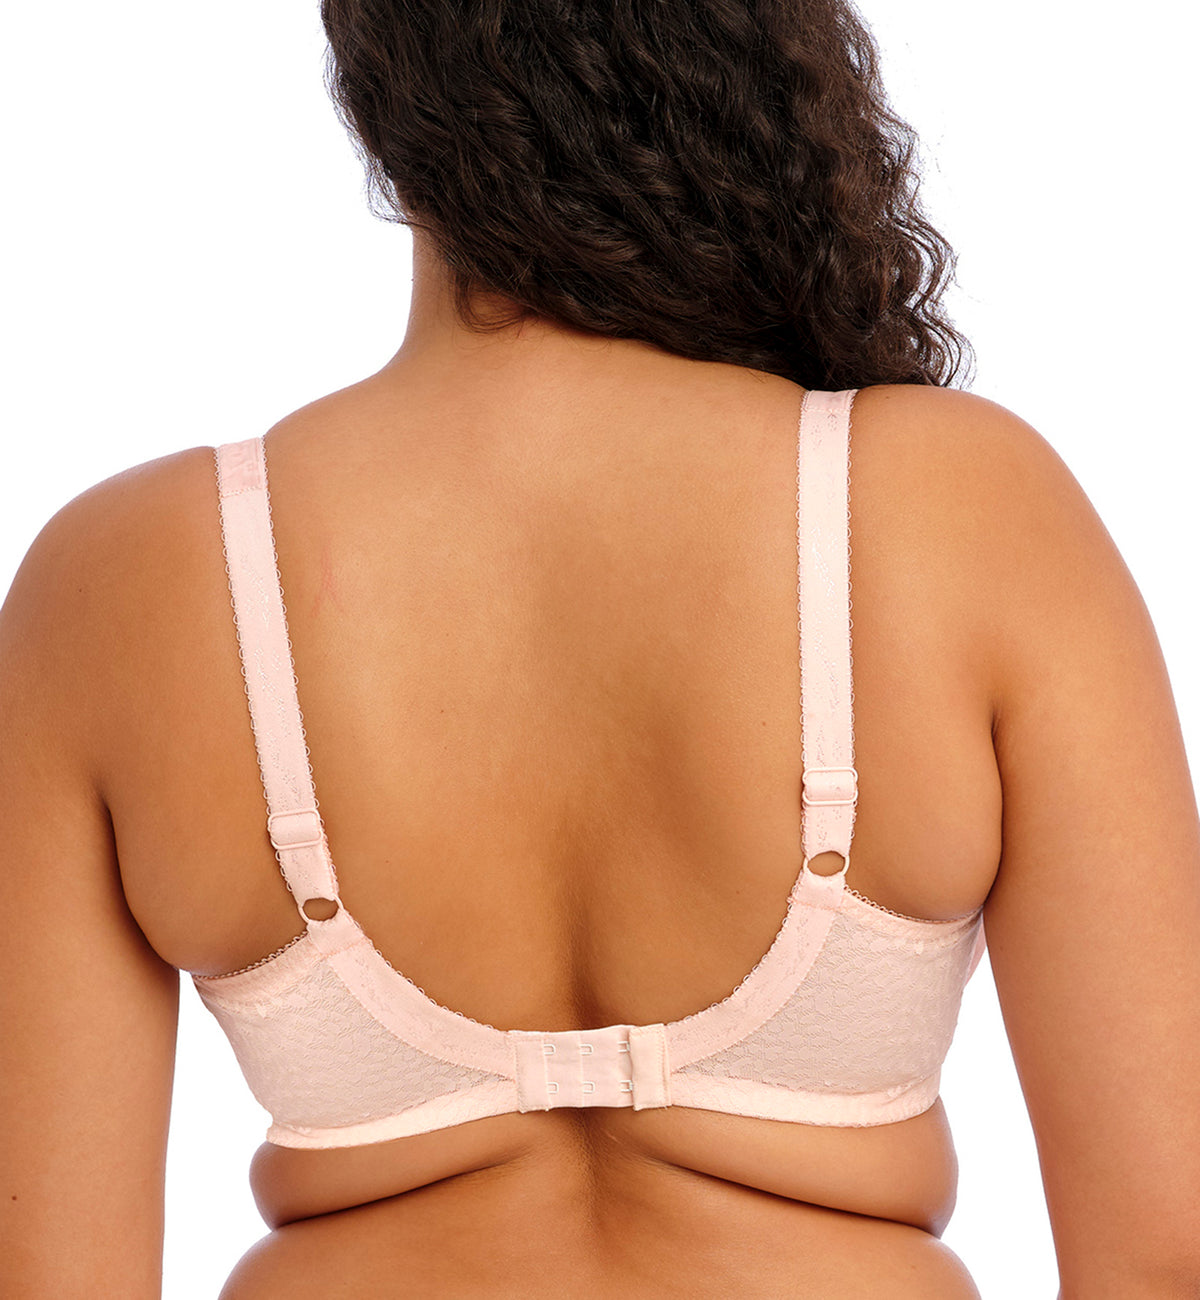 Elomi Lucie Banded Stretch Lace Plunge Underwire Bra (4490),32GG,Pale Blush - Pale Blush,32GG